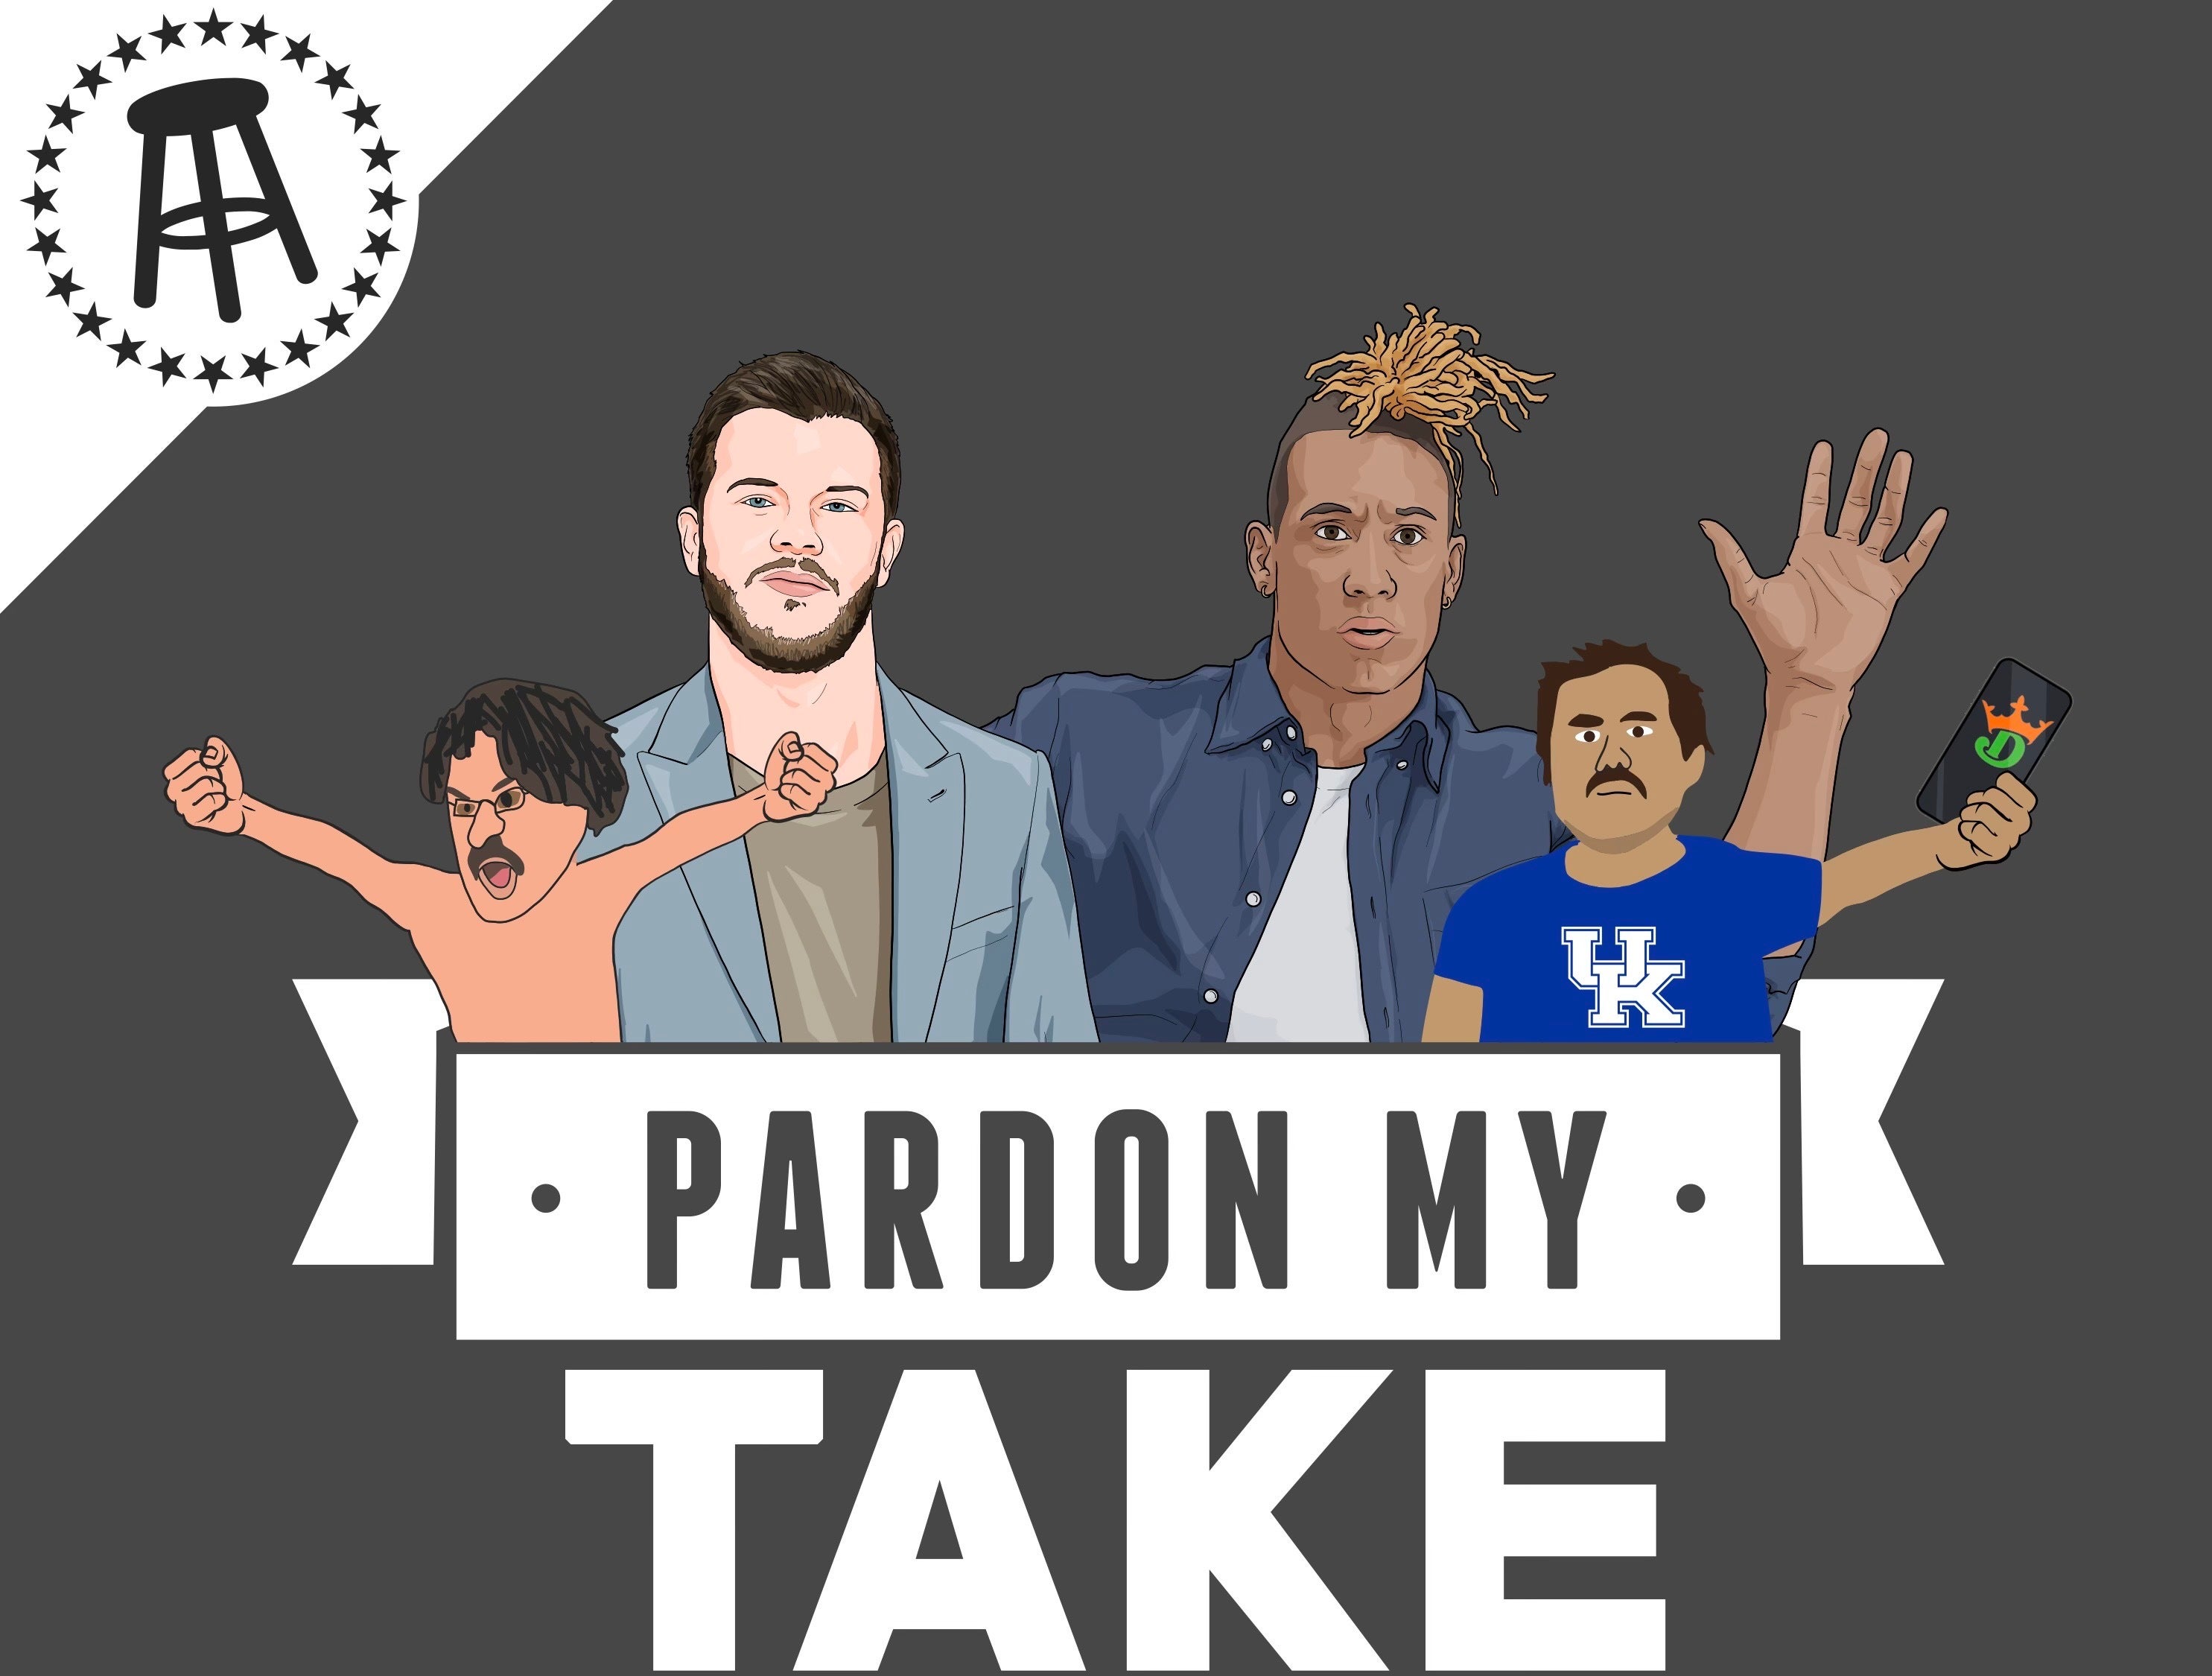 Real Bros Jimmy Tatro & Christian Pierce, Best of KSR W/Rick Pitino, NBA Draft + Mt Rushmore Of Hobbies That Become Your Personality